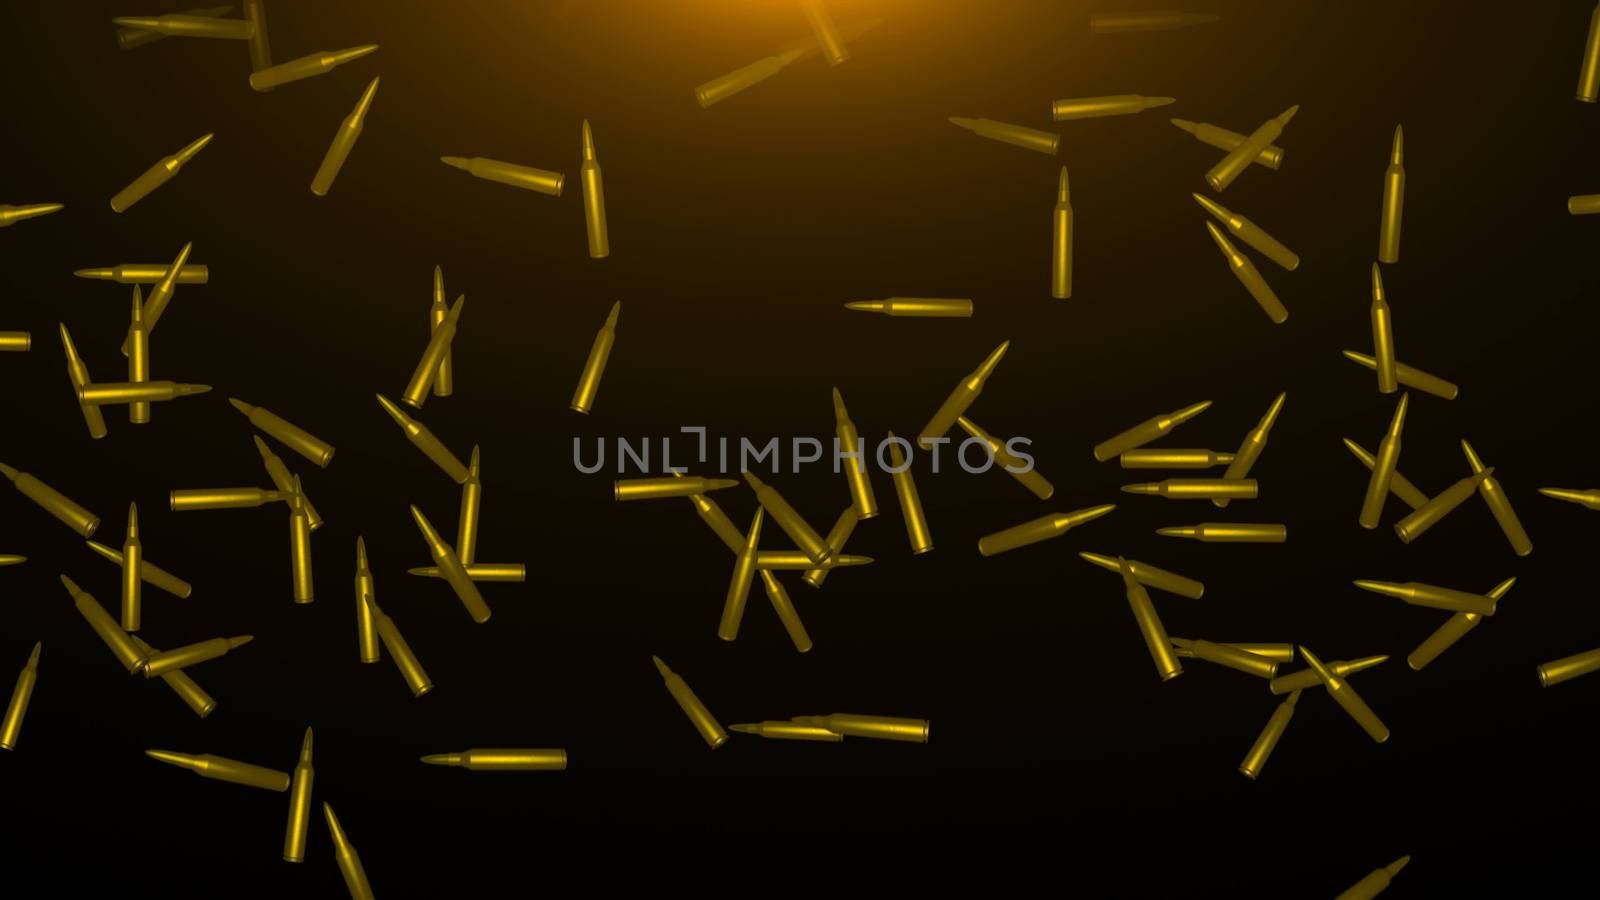 Abstract background with bullets. Digital illustration. 3d rendering